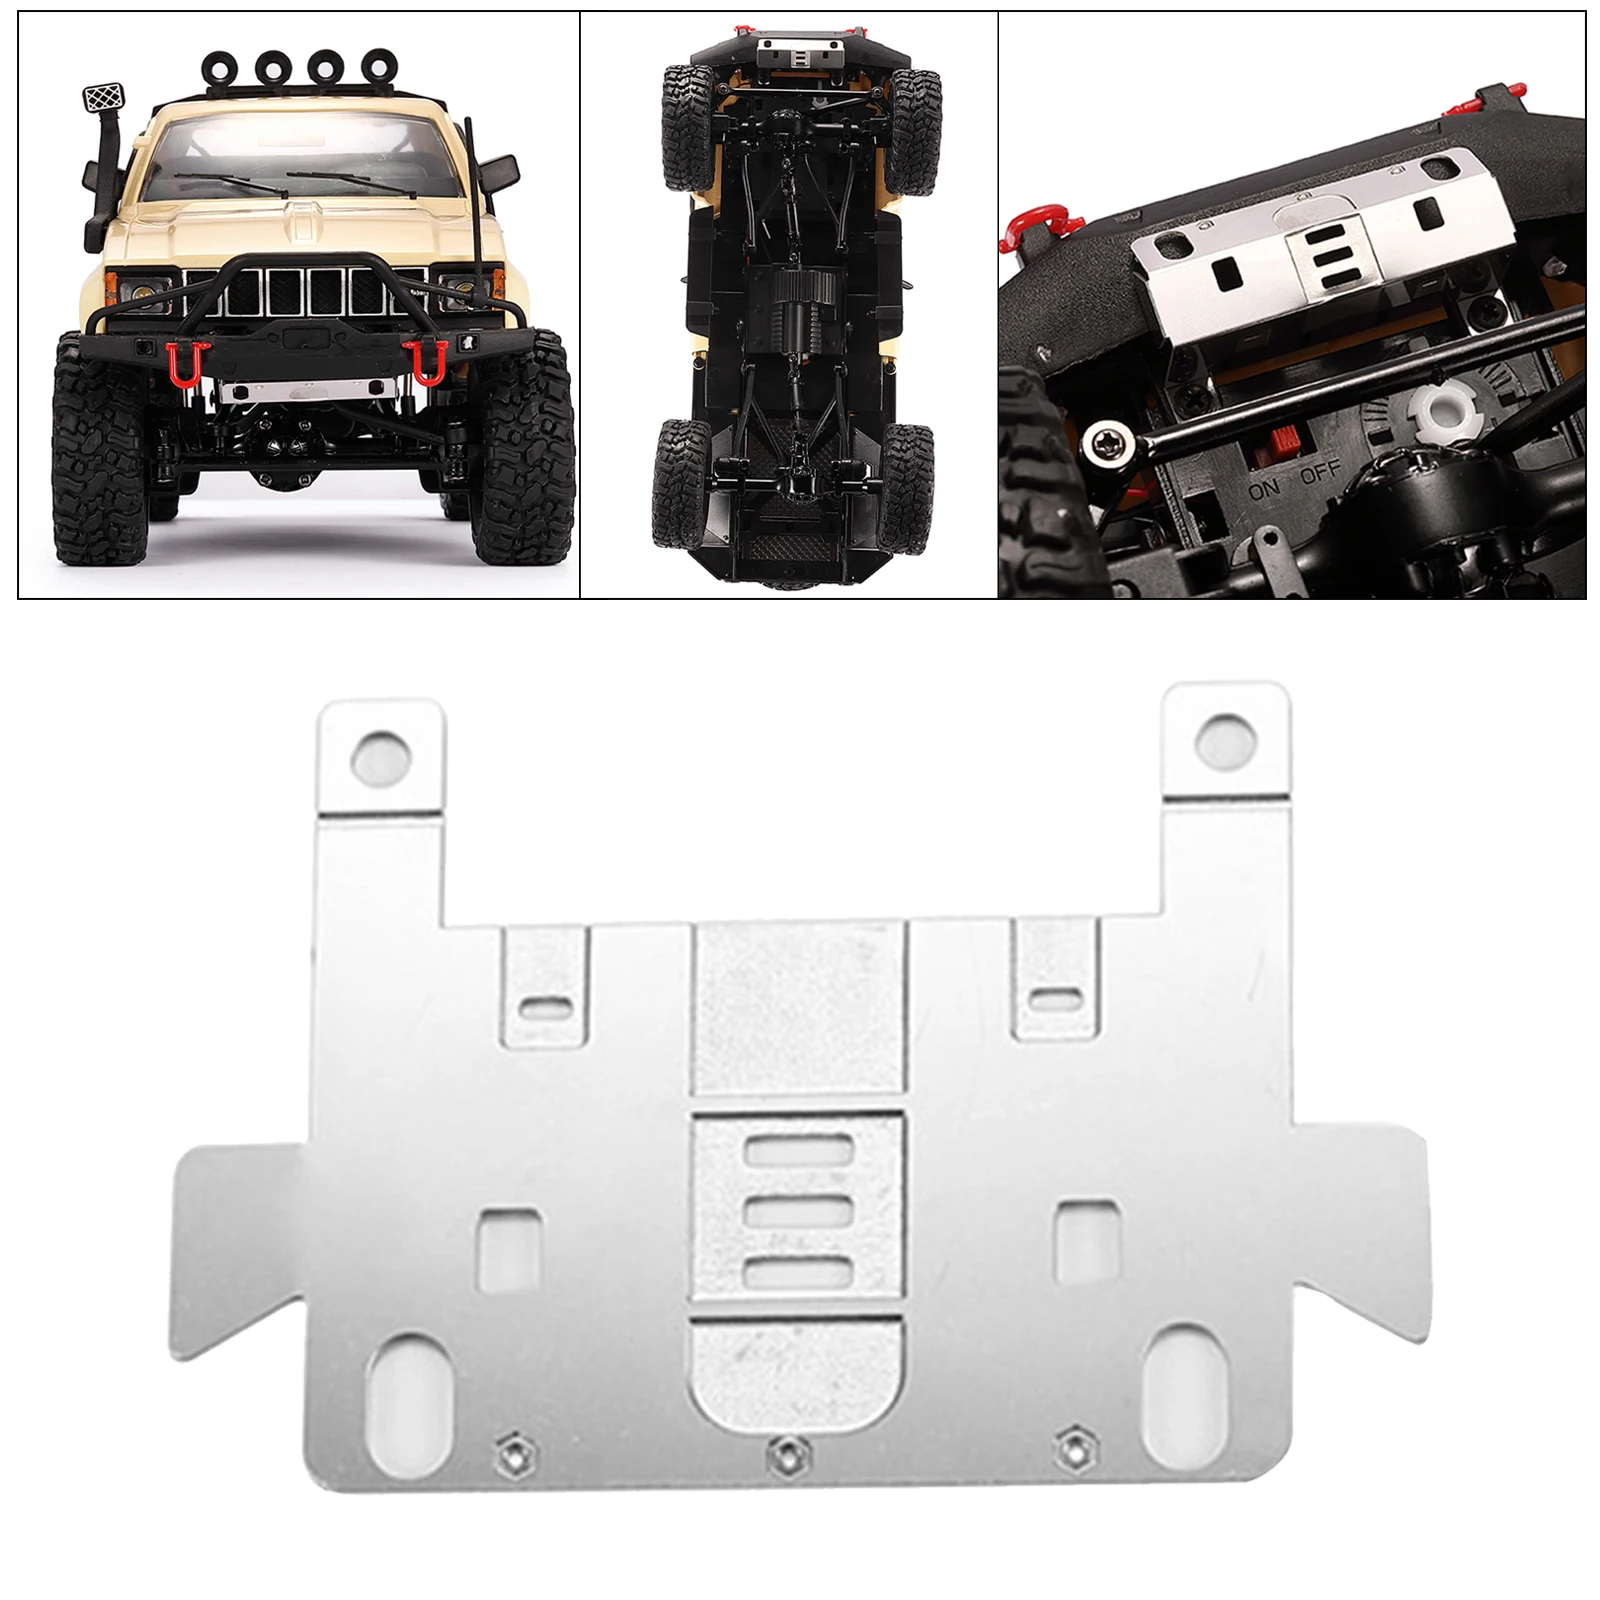 Decoration Accessories DIY Upgrades Modified Model Parts Kit for WPL C14 C24 Off-Road Spare Toy Car Accs